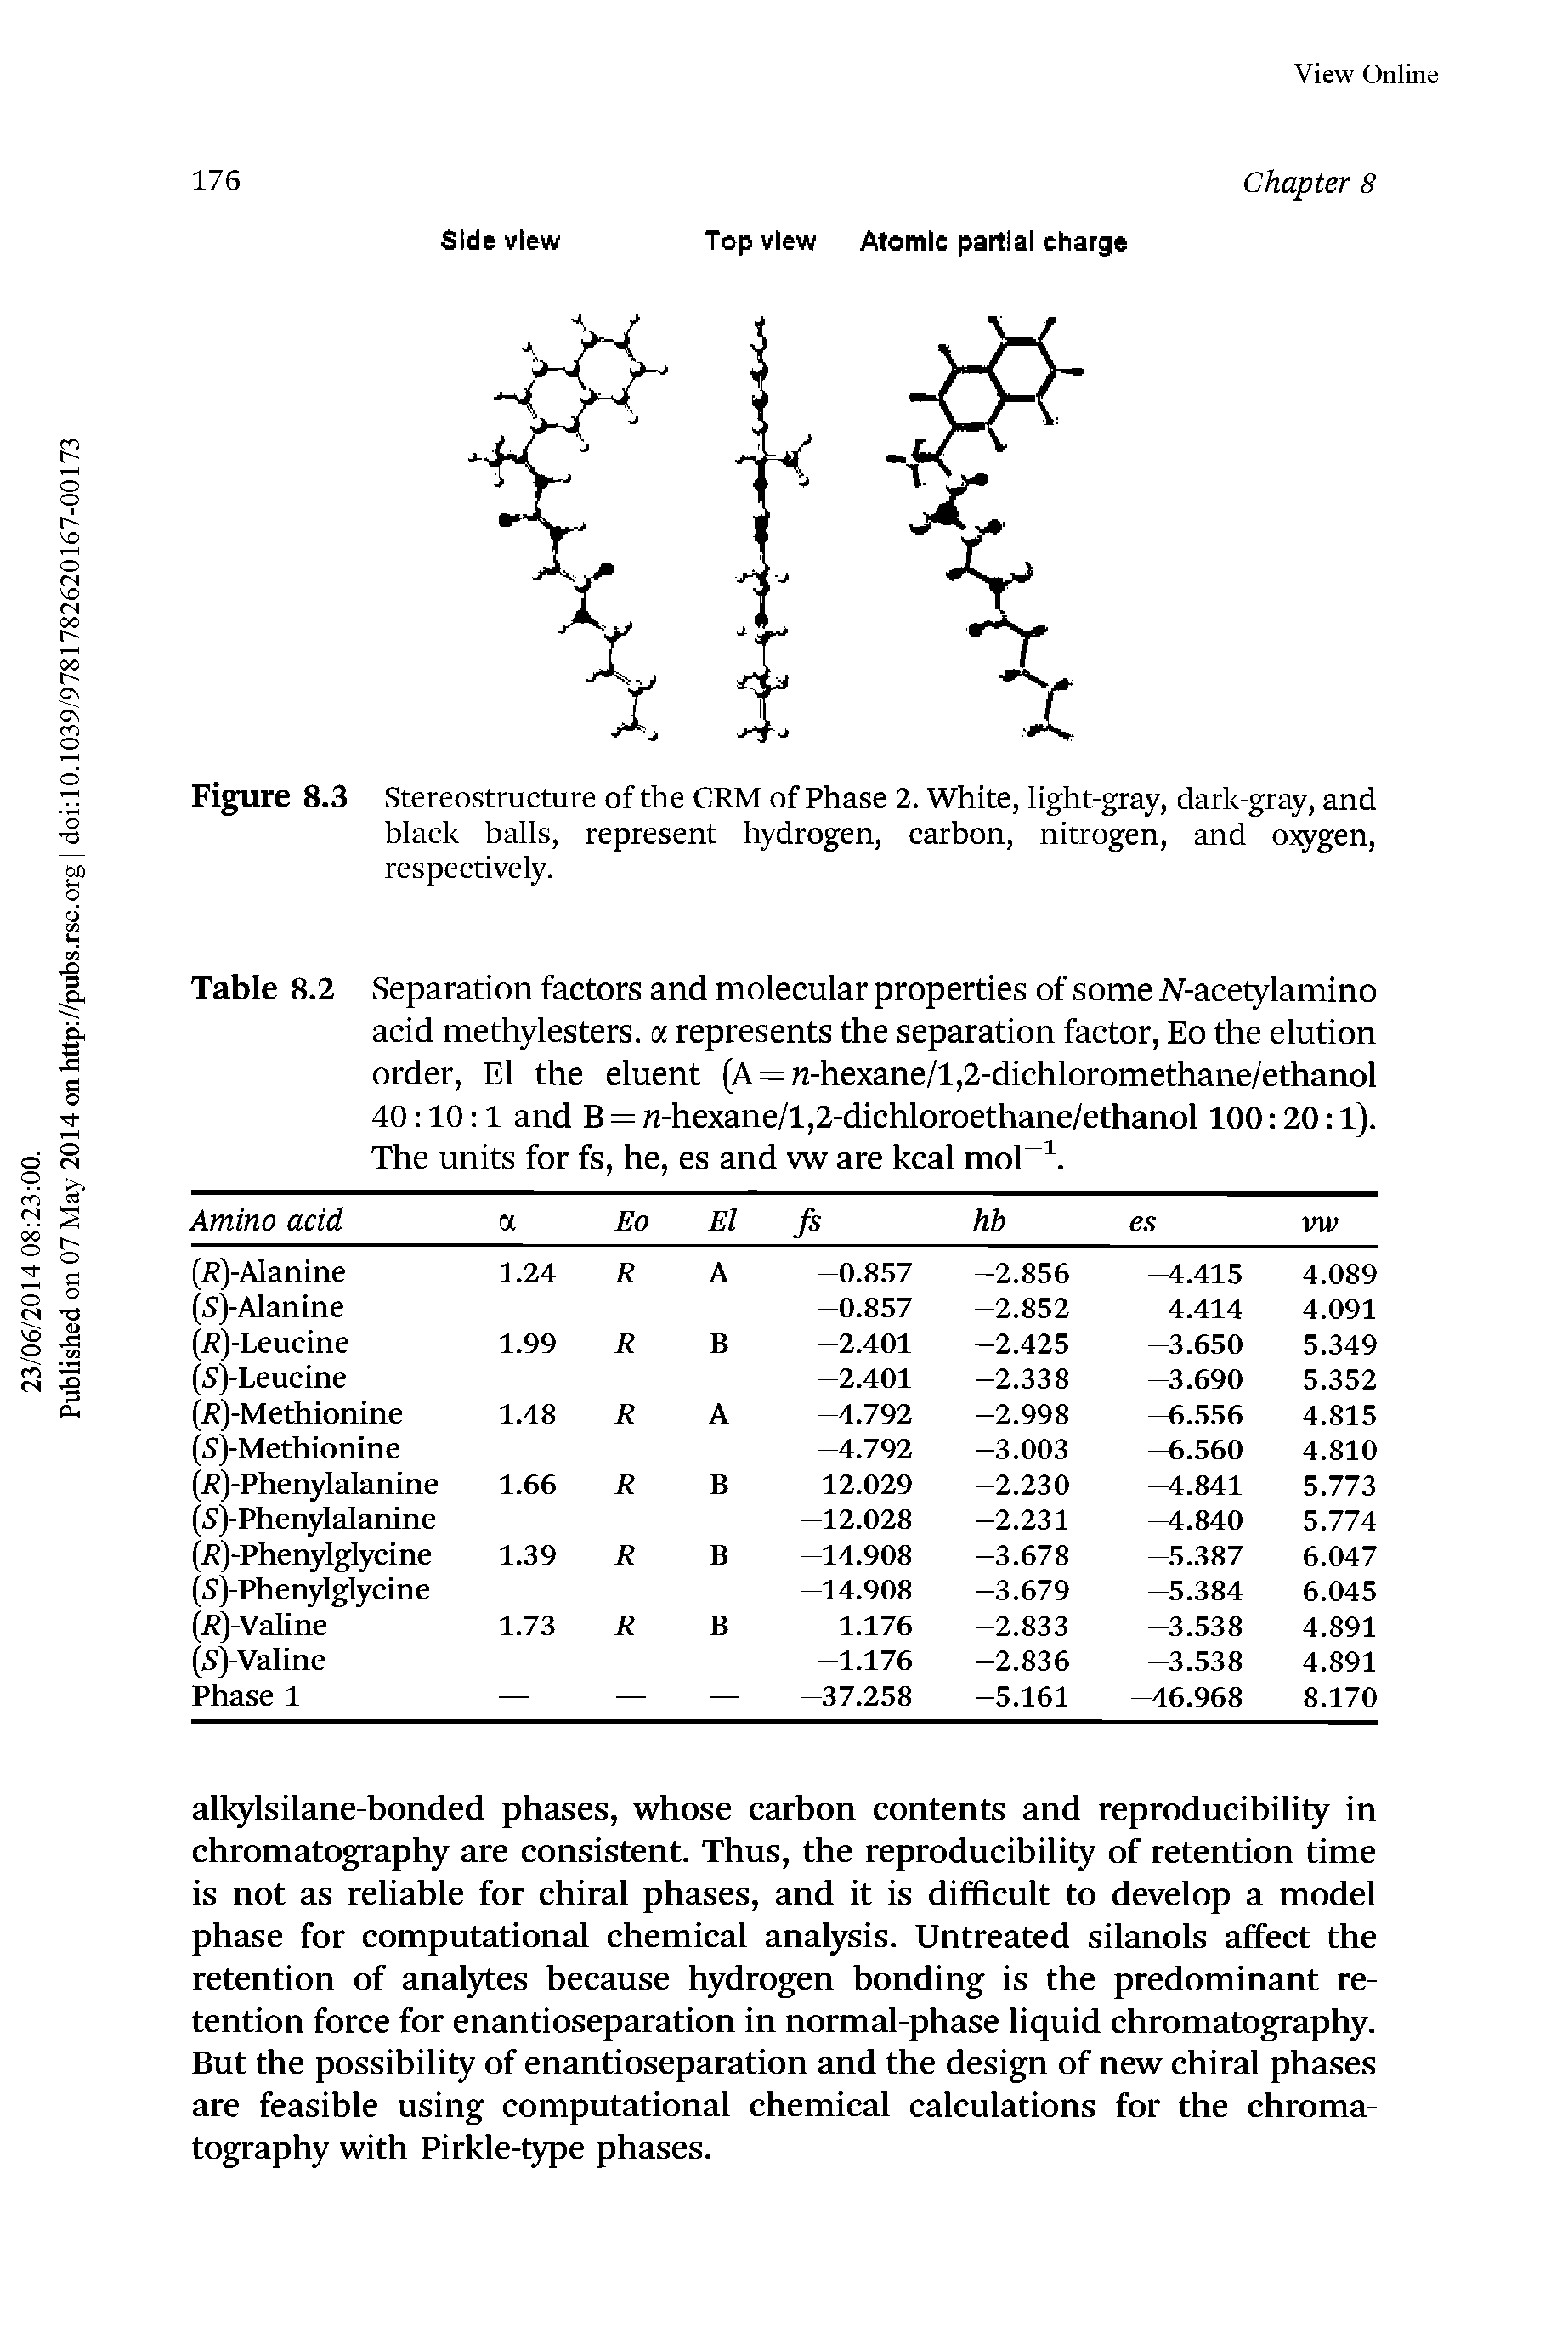 Table 8.2 Separation factors and molecular properties of some N-acetylamino acid methylesters. a represents the separation factor, Eo the elution order, El the eluent (A=n-hexane/l,2-dichloromethane/ethanol 40 10 1 and B = n-hexane/l,2-dichloroethane/ethanol 100 20 1). The units for fs, he, es and vw are kcal mol. ...